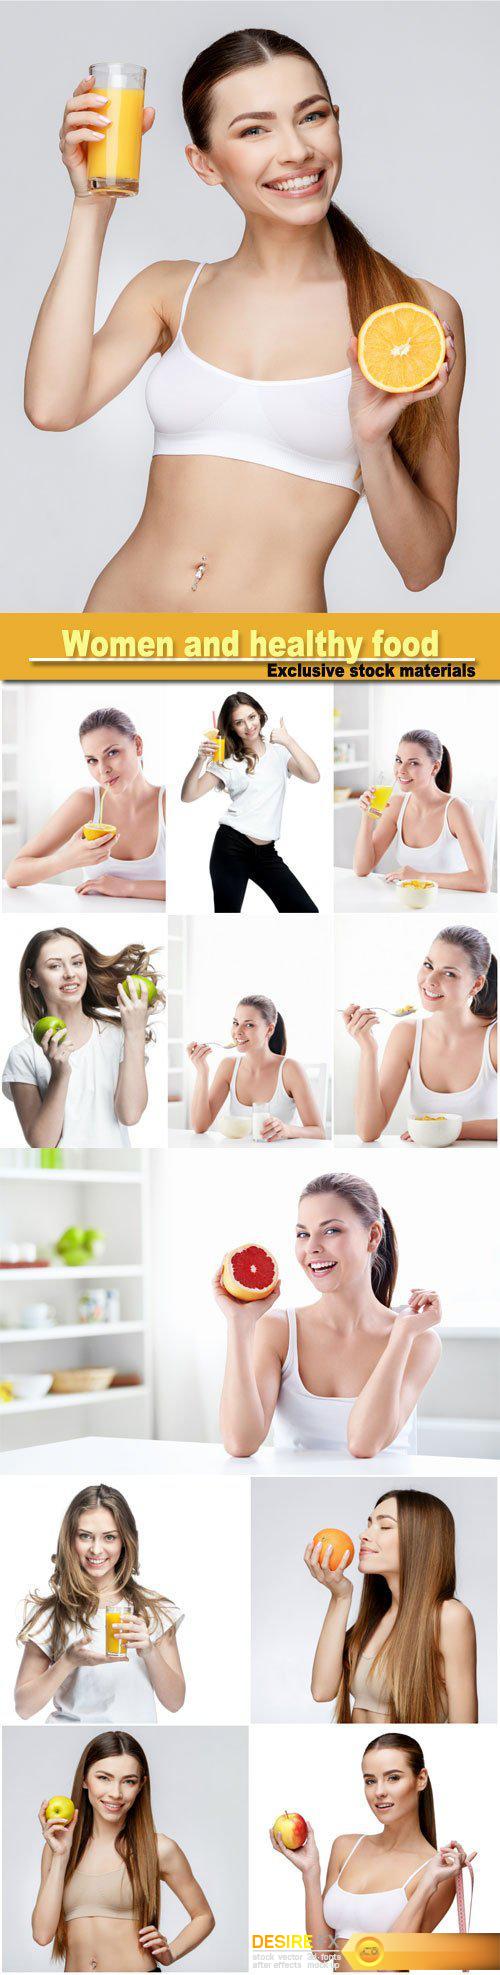 Young women with green apples and orange juice